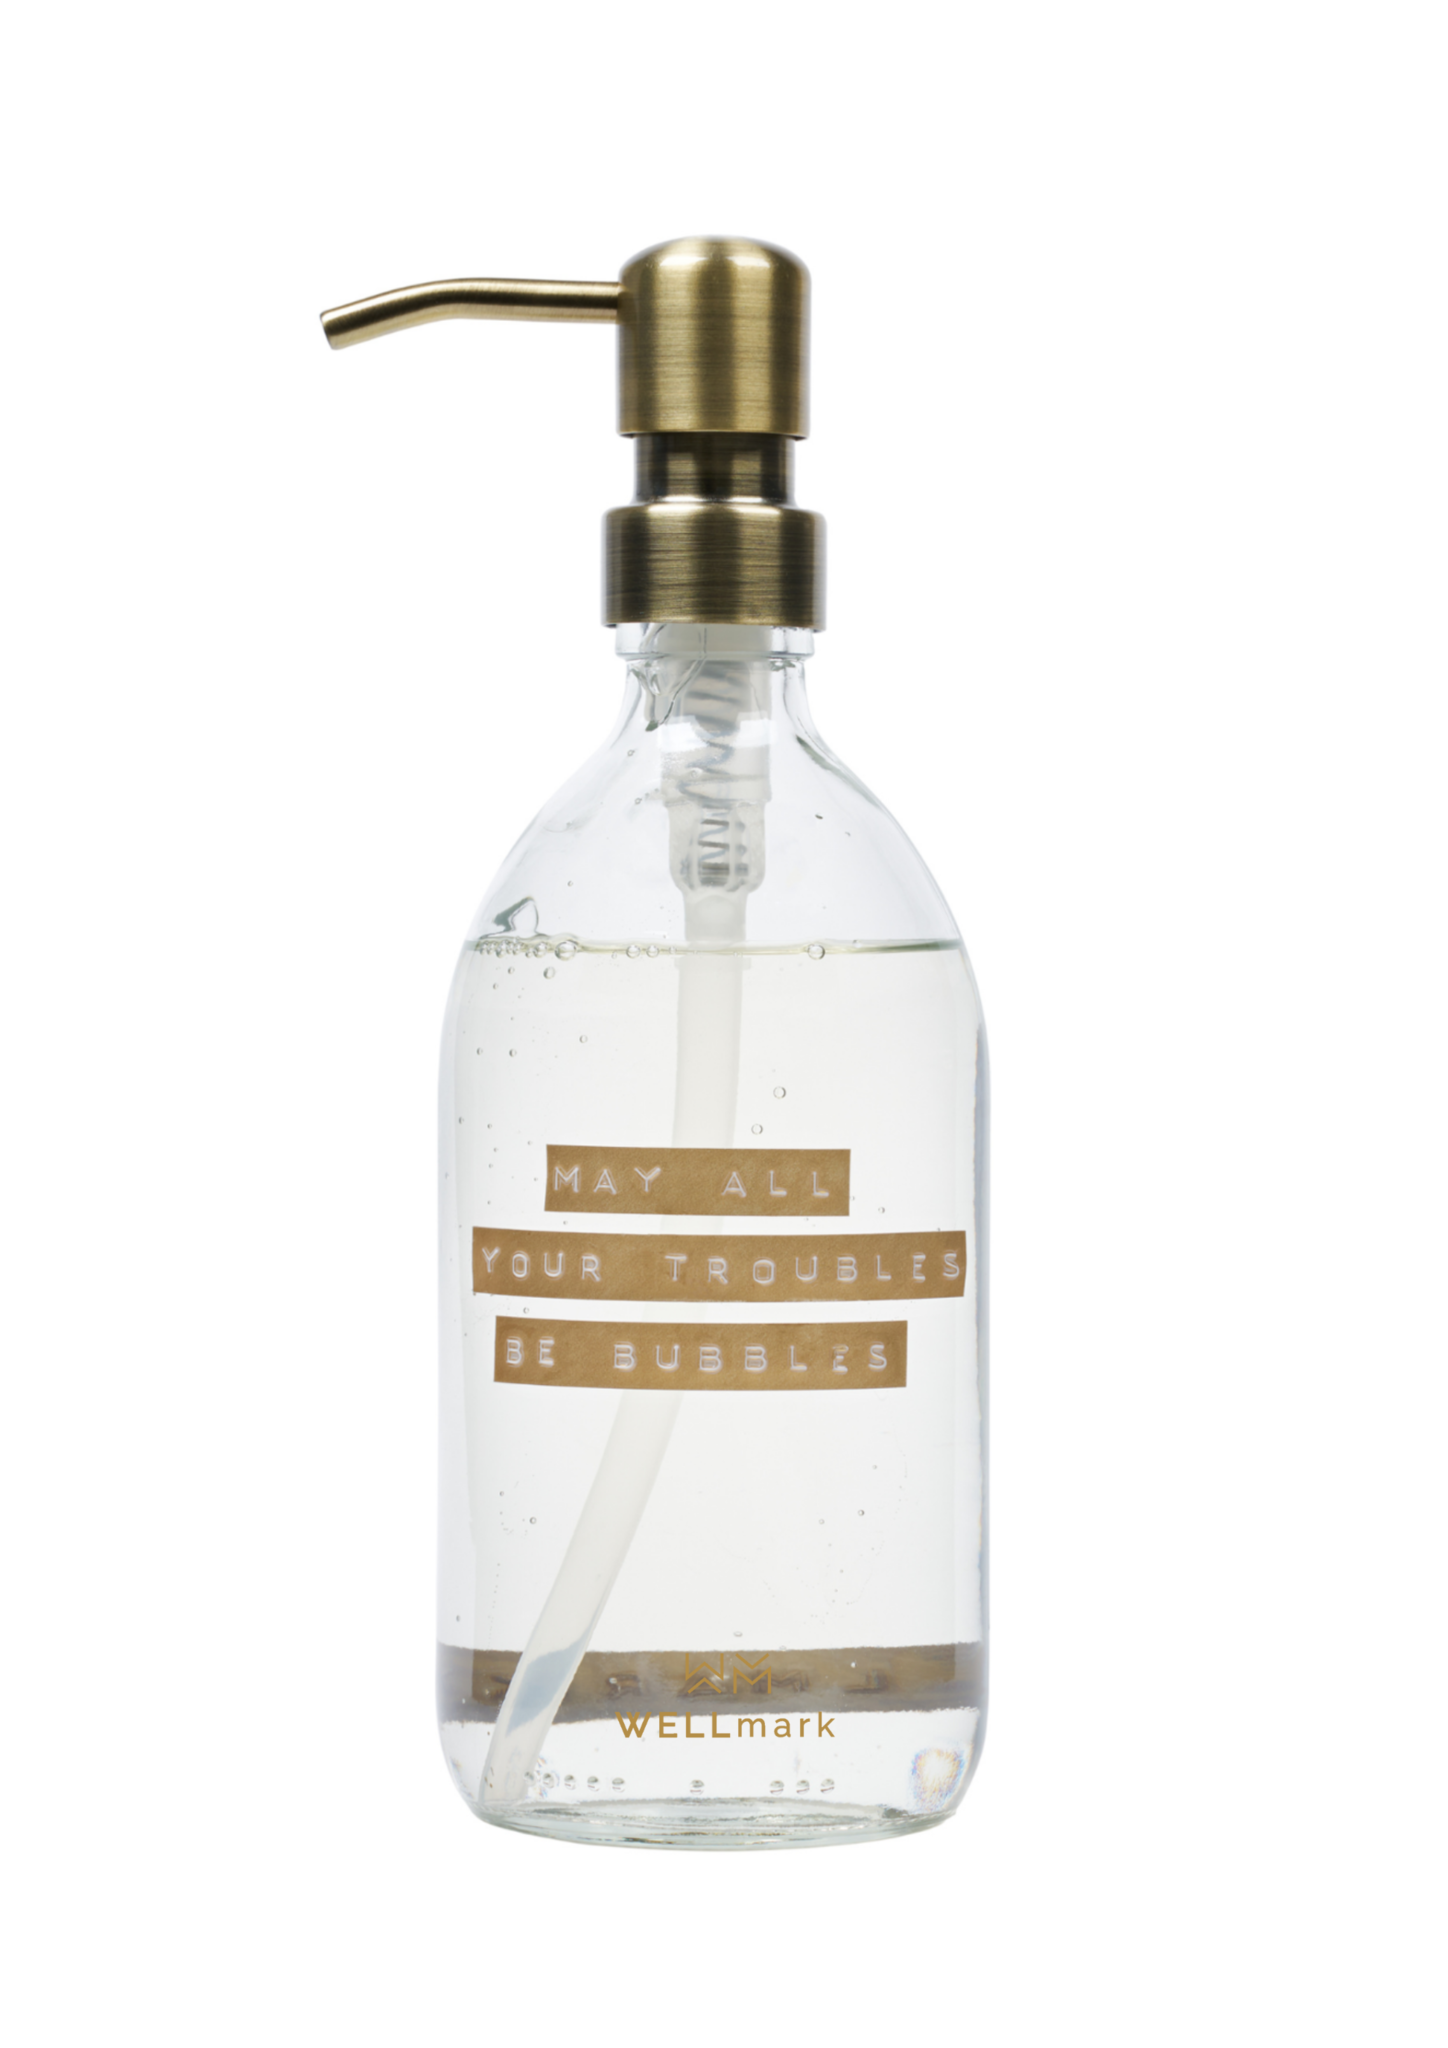 Wellmark - hand soap transparant/brass fresh linen bronze 500ml - may all your troubles